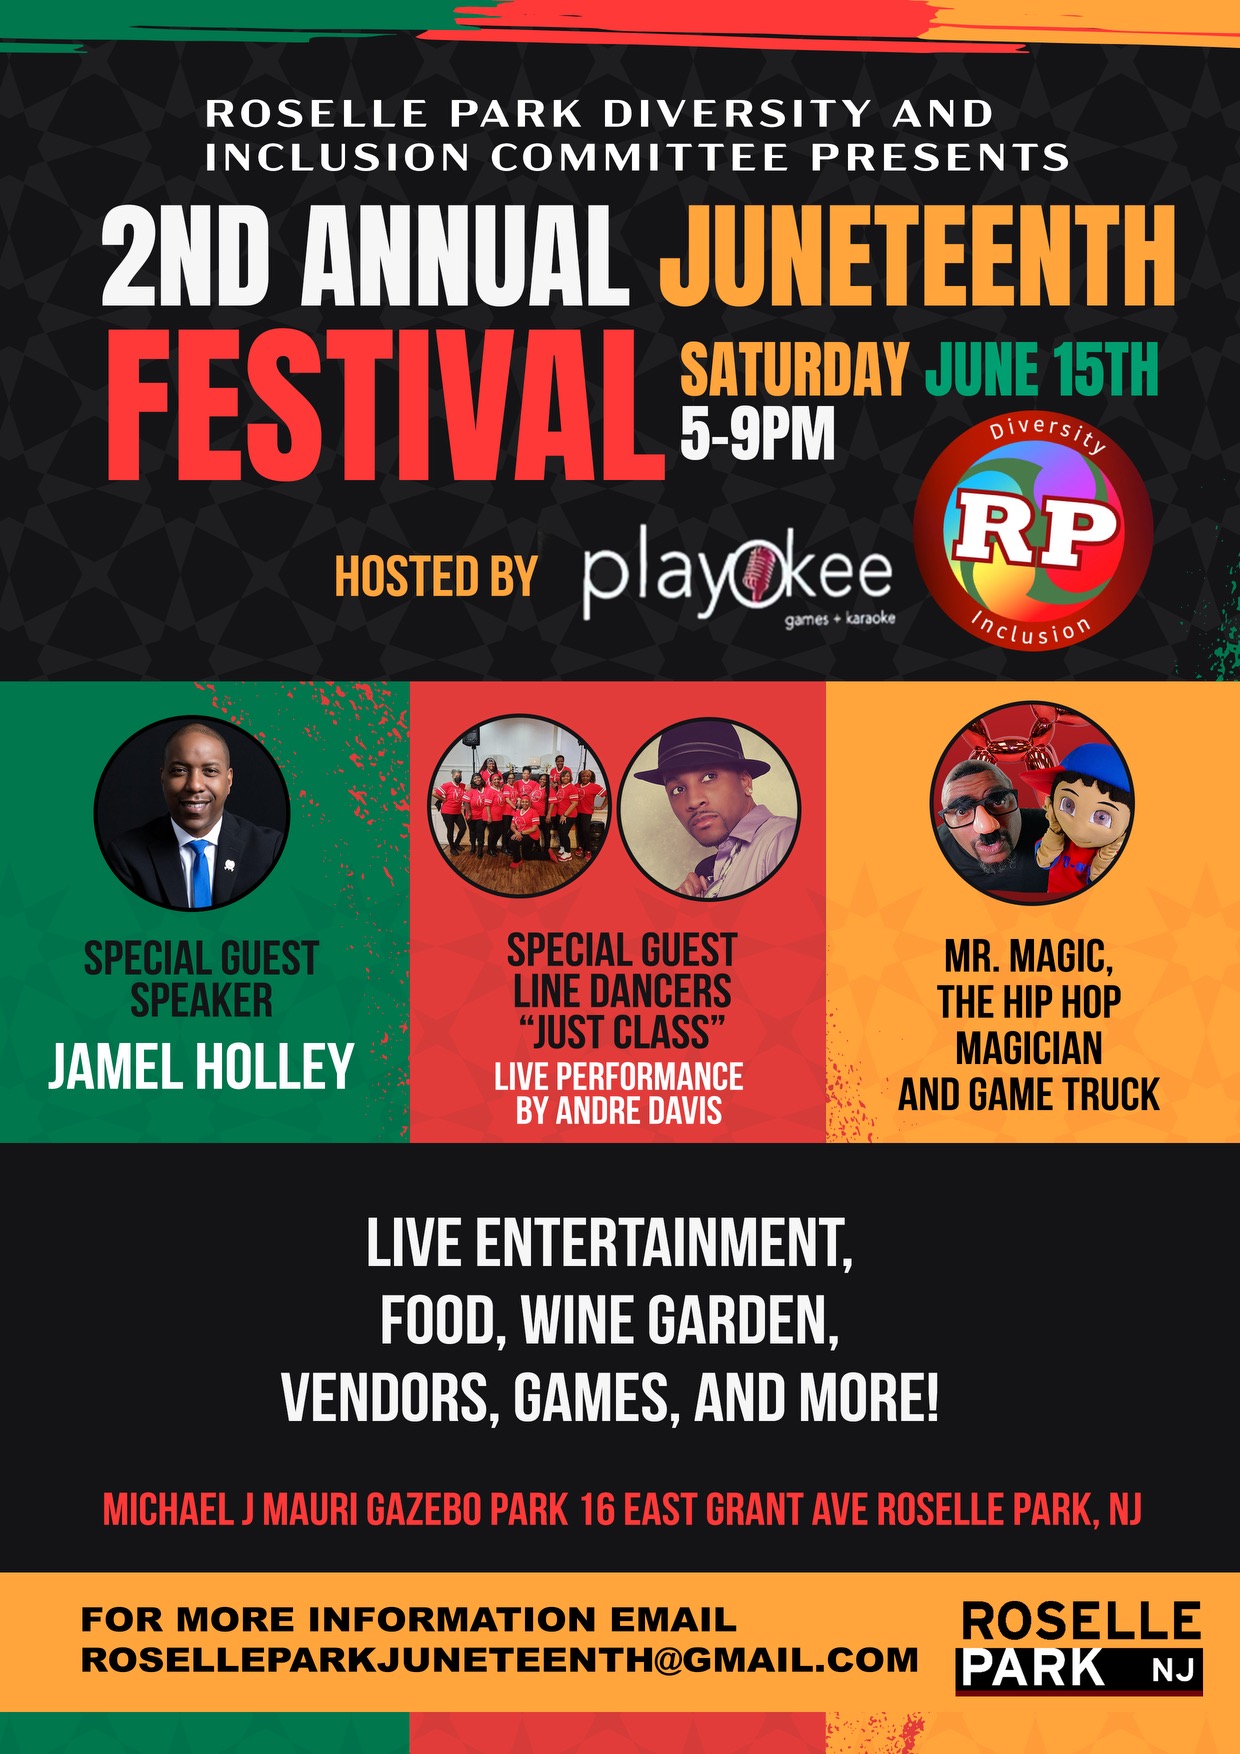 Roselle Park to host 2nd Annual Juneteenth Festival